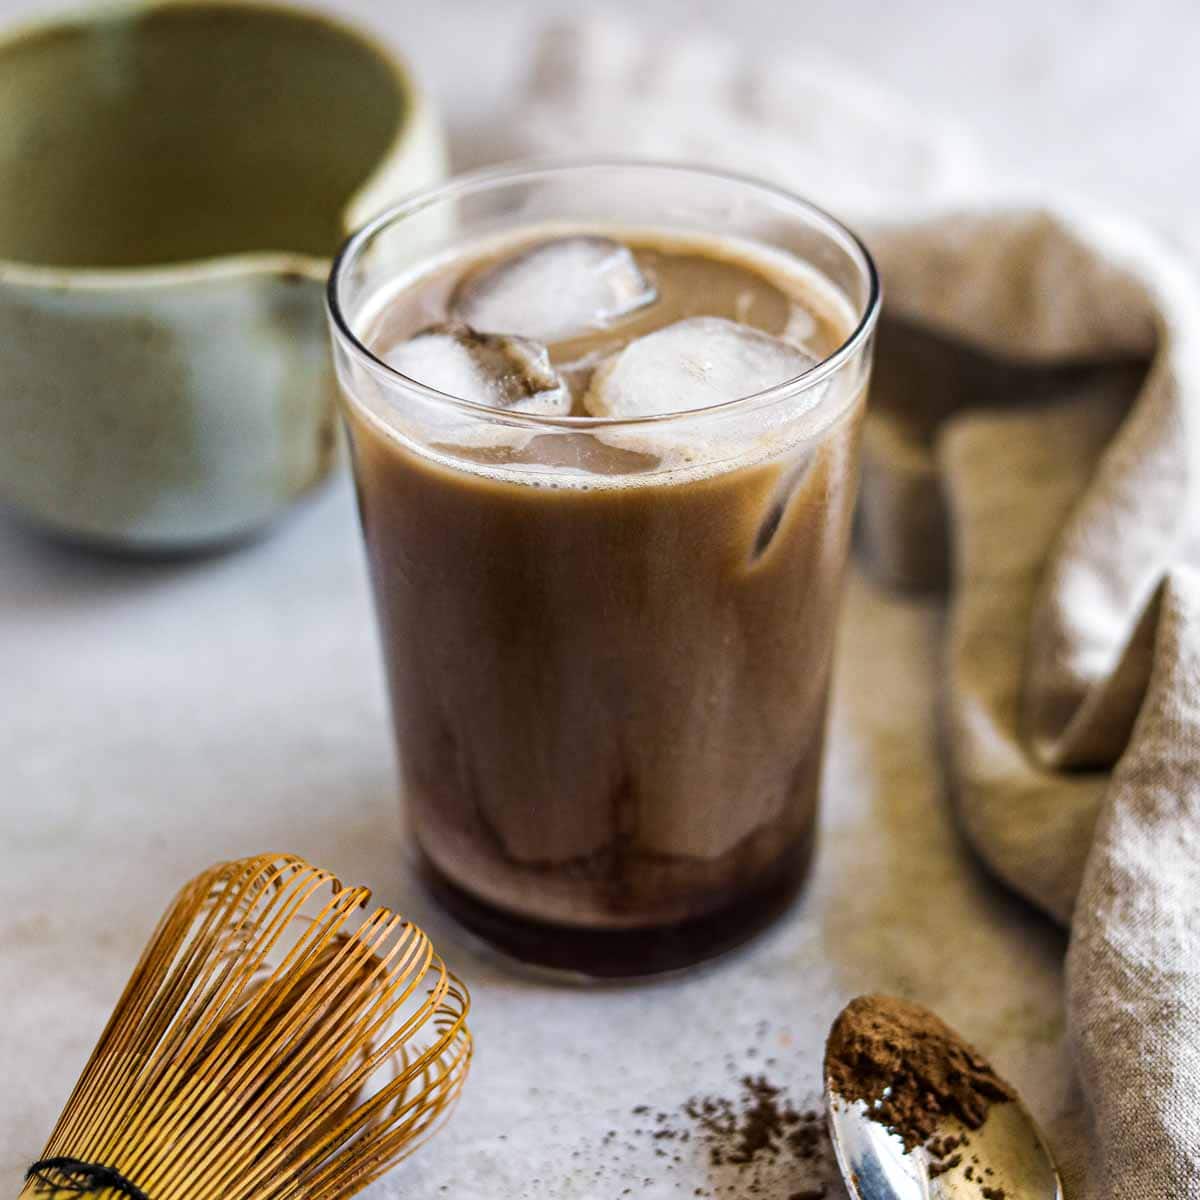 Iced Hojicha latte in a glass with ice, styled with a bamboo whisk and ground Hojicha.